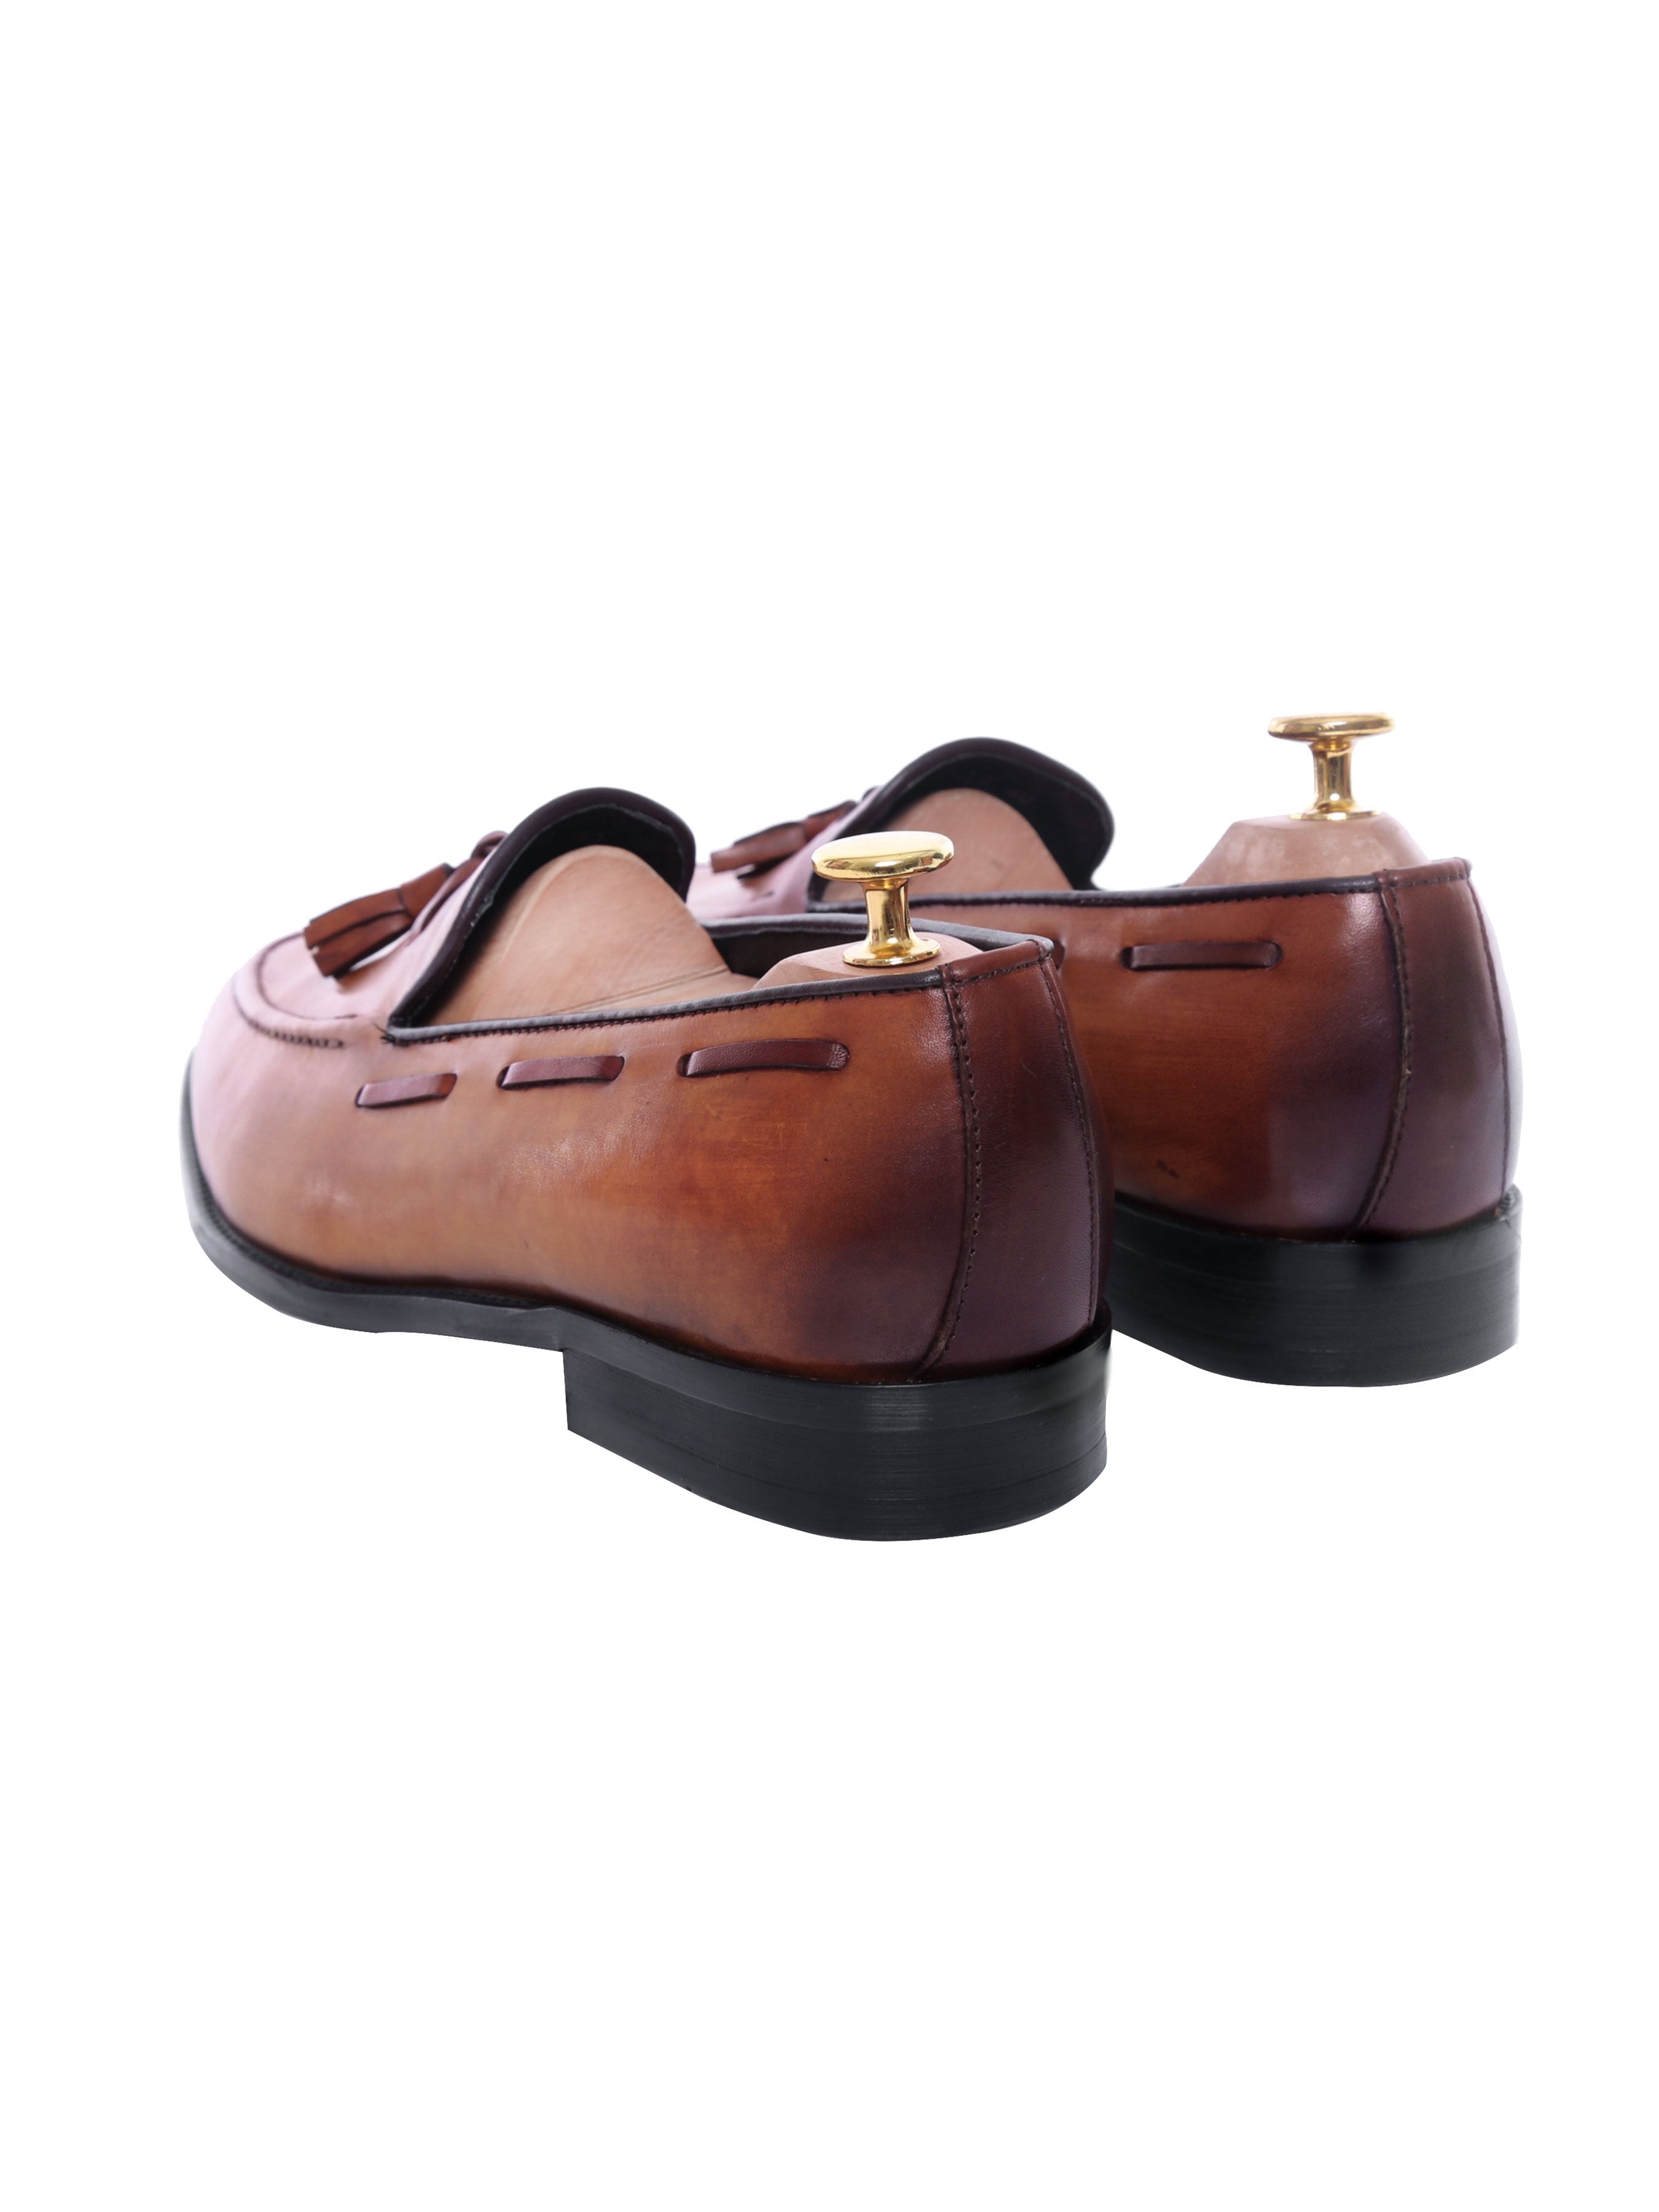 Tassel Loafer - Cognac Tan (Hand Painted Patina) - Zeve Shoes